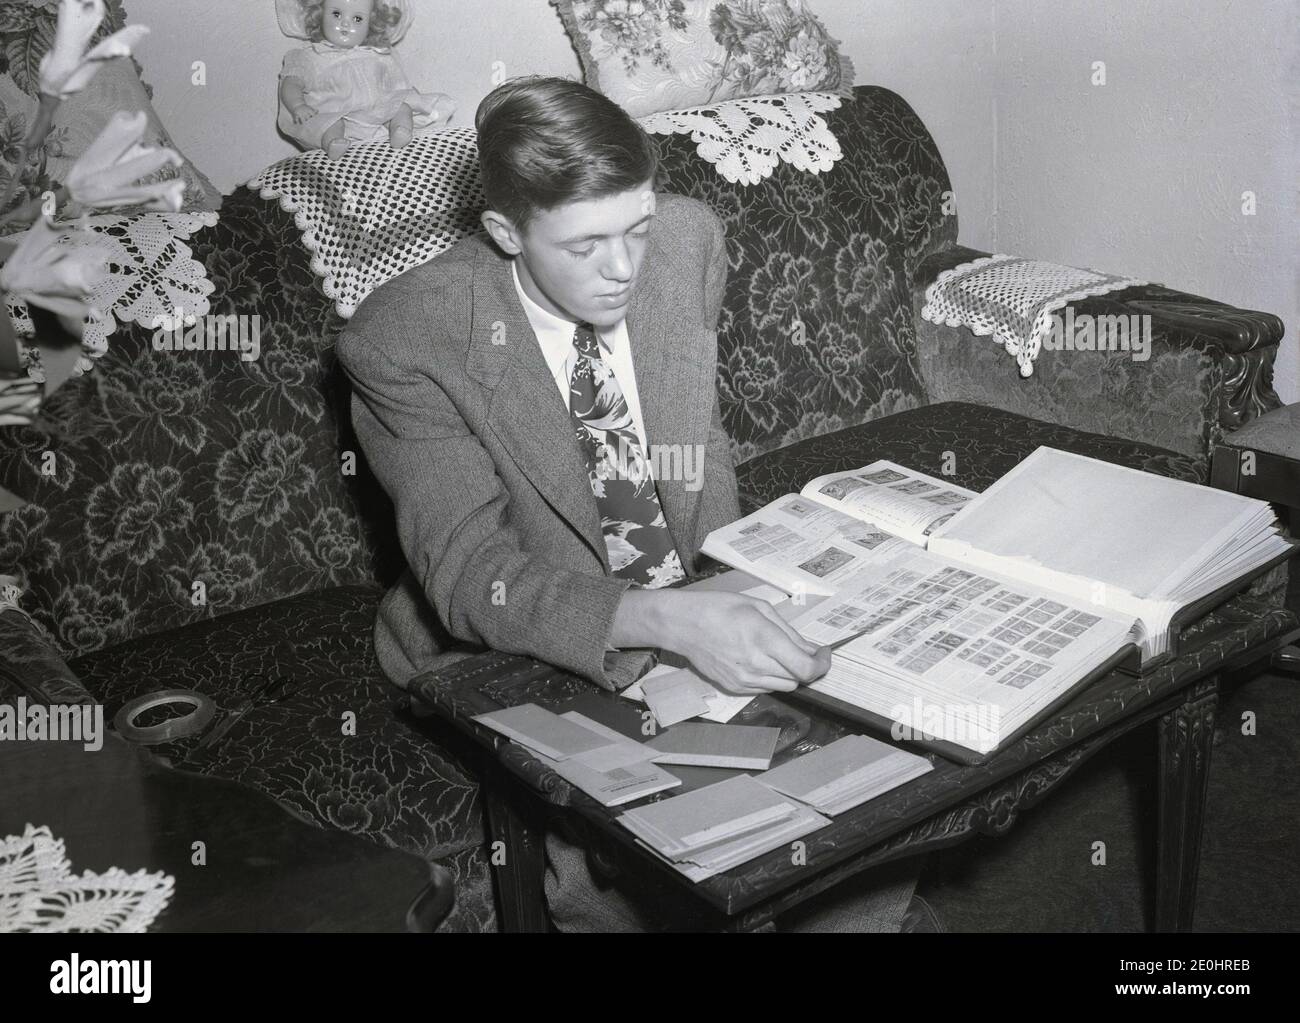 1948, historical, a smartly dressed young man in a jacket and tie sitting on a sofa looking through his stamp collection, USA. The popular hobby or pasttime of collecting stamps is one of the areas that makes up the wider subject of 'philately', which is the more serious, study of stamps, although a philatelist may, but does not have to, collect stamps. Postage stamps are collected for their possible historical value and their wide and varied subject matter. Stock Photo